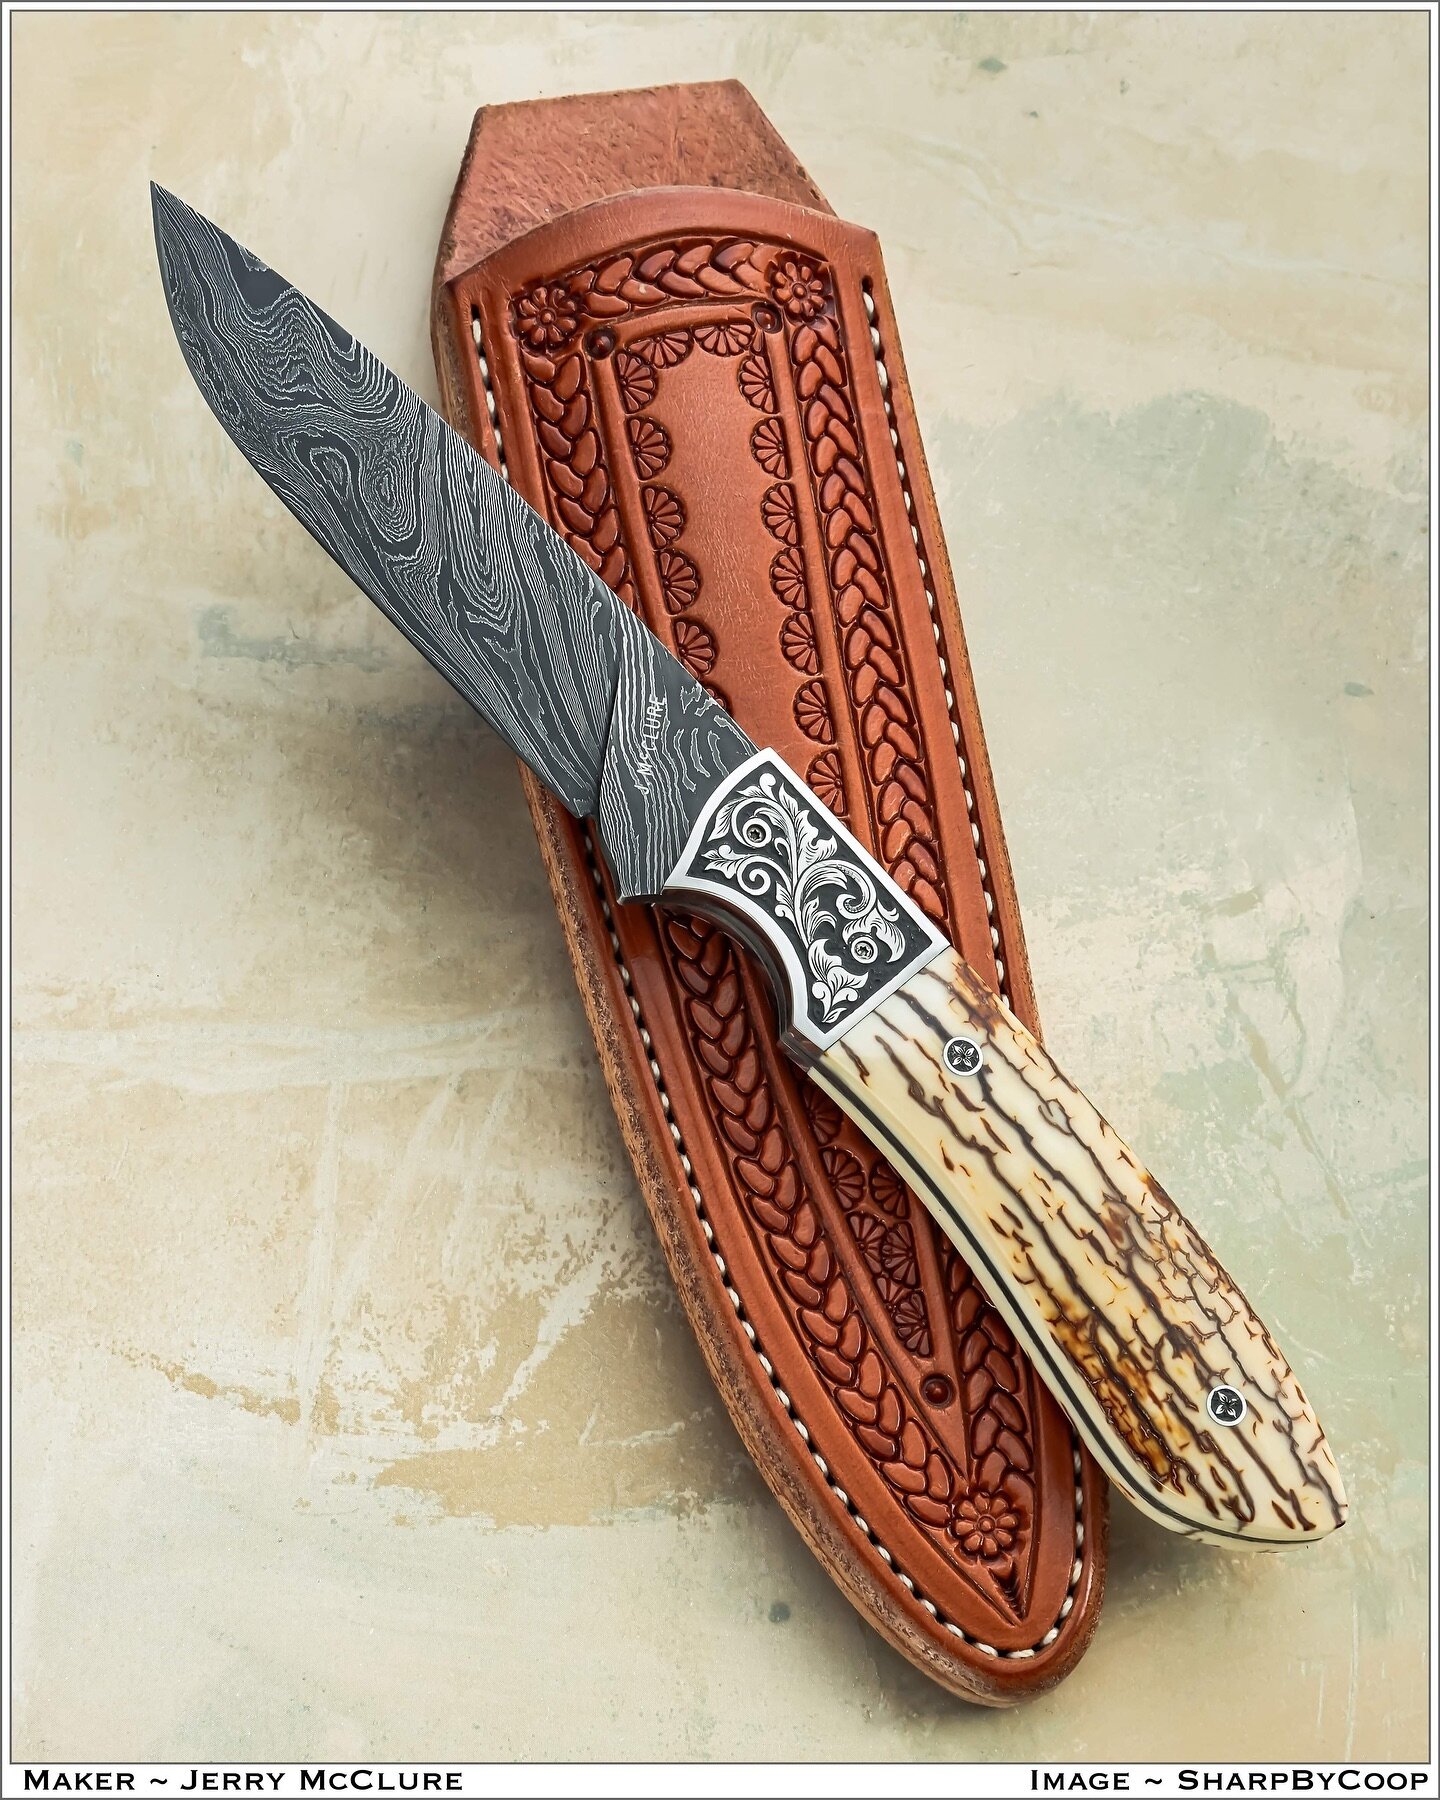 Our grand prize knife for the 2024 New York Custom Knife Show! Eternal thanks to knifemaker Jerry McClure for donating this amazing knife for the show! And, as always, a very special thank you to photographer Jim Cooper @sharpbycoop for beautifully c